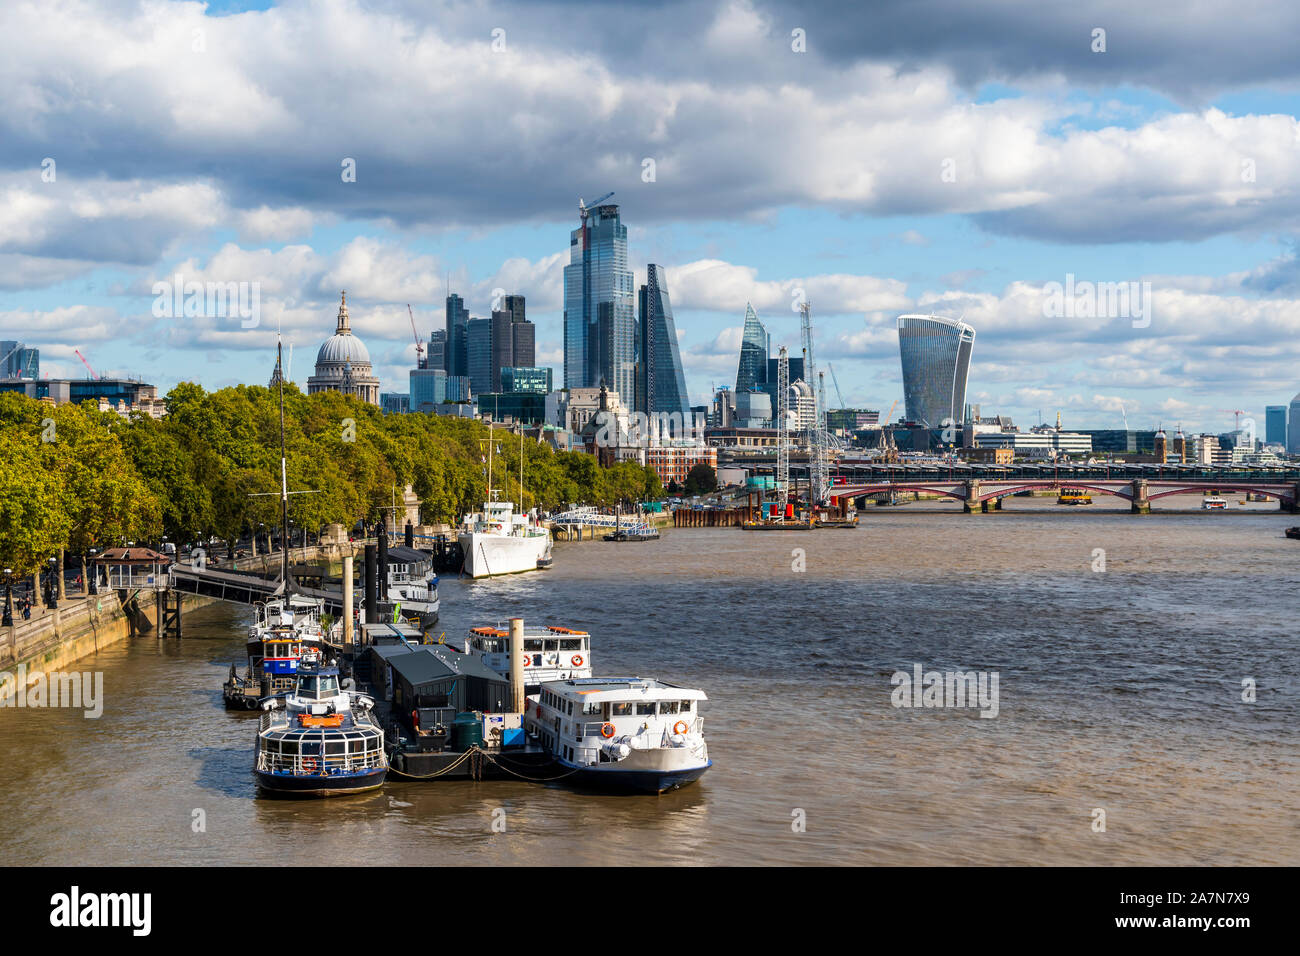 The view from Waterloo Bridge towards St Paul's and the City of London Stock Photo